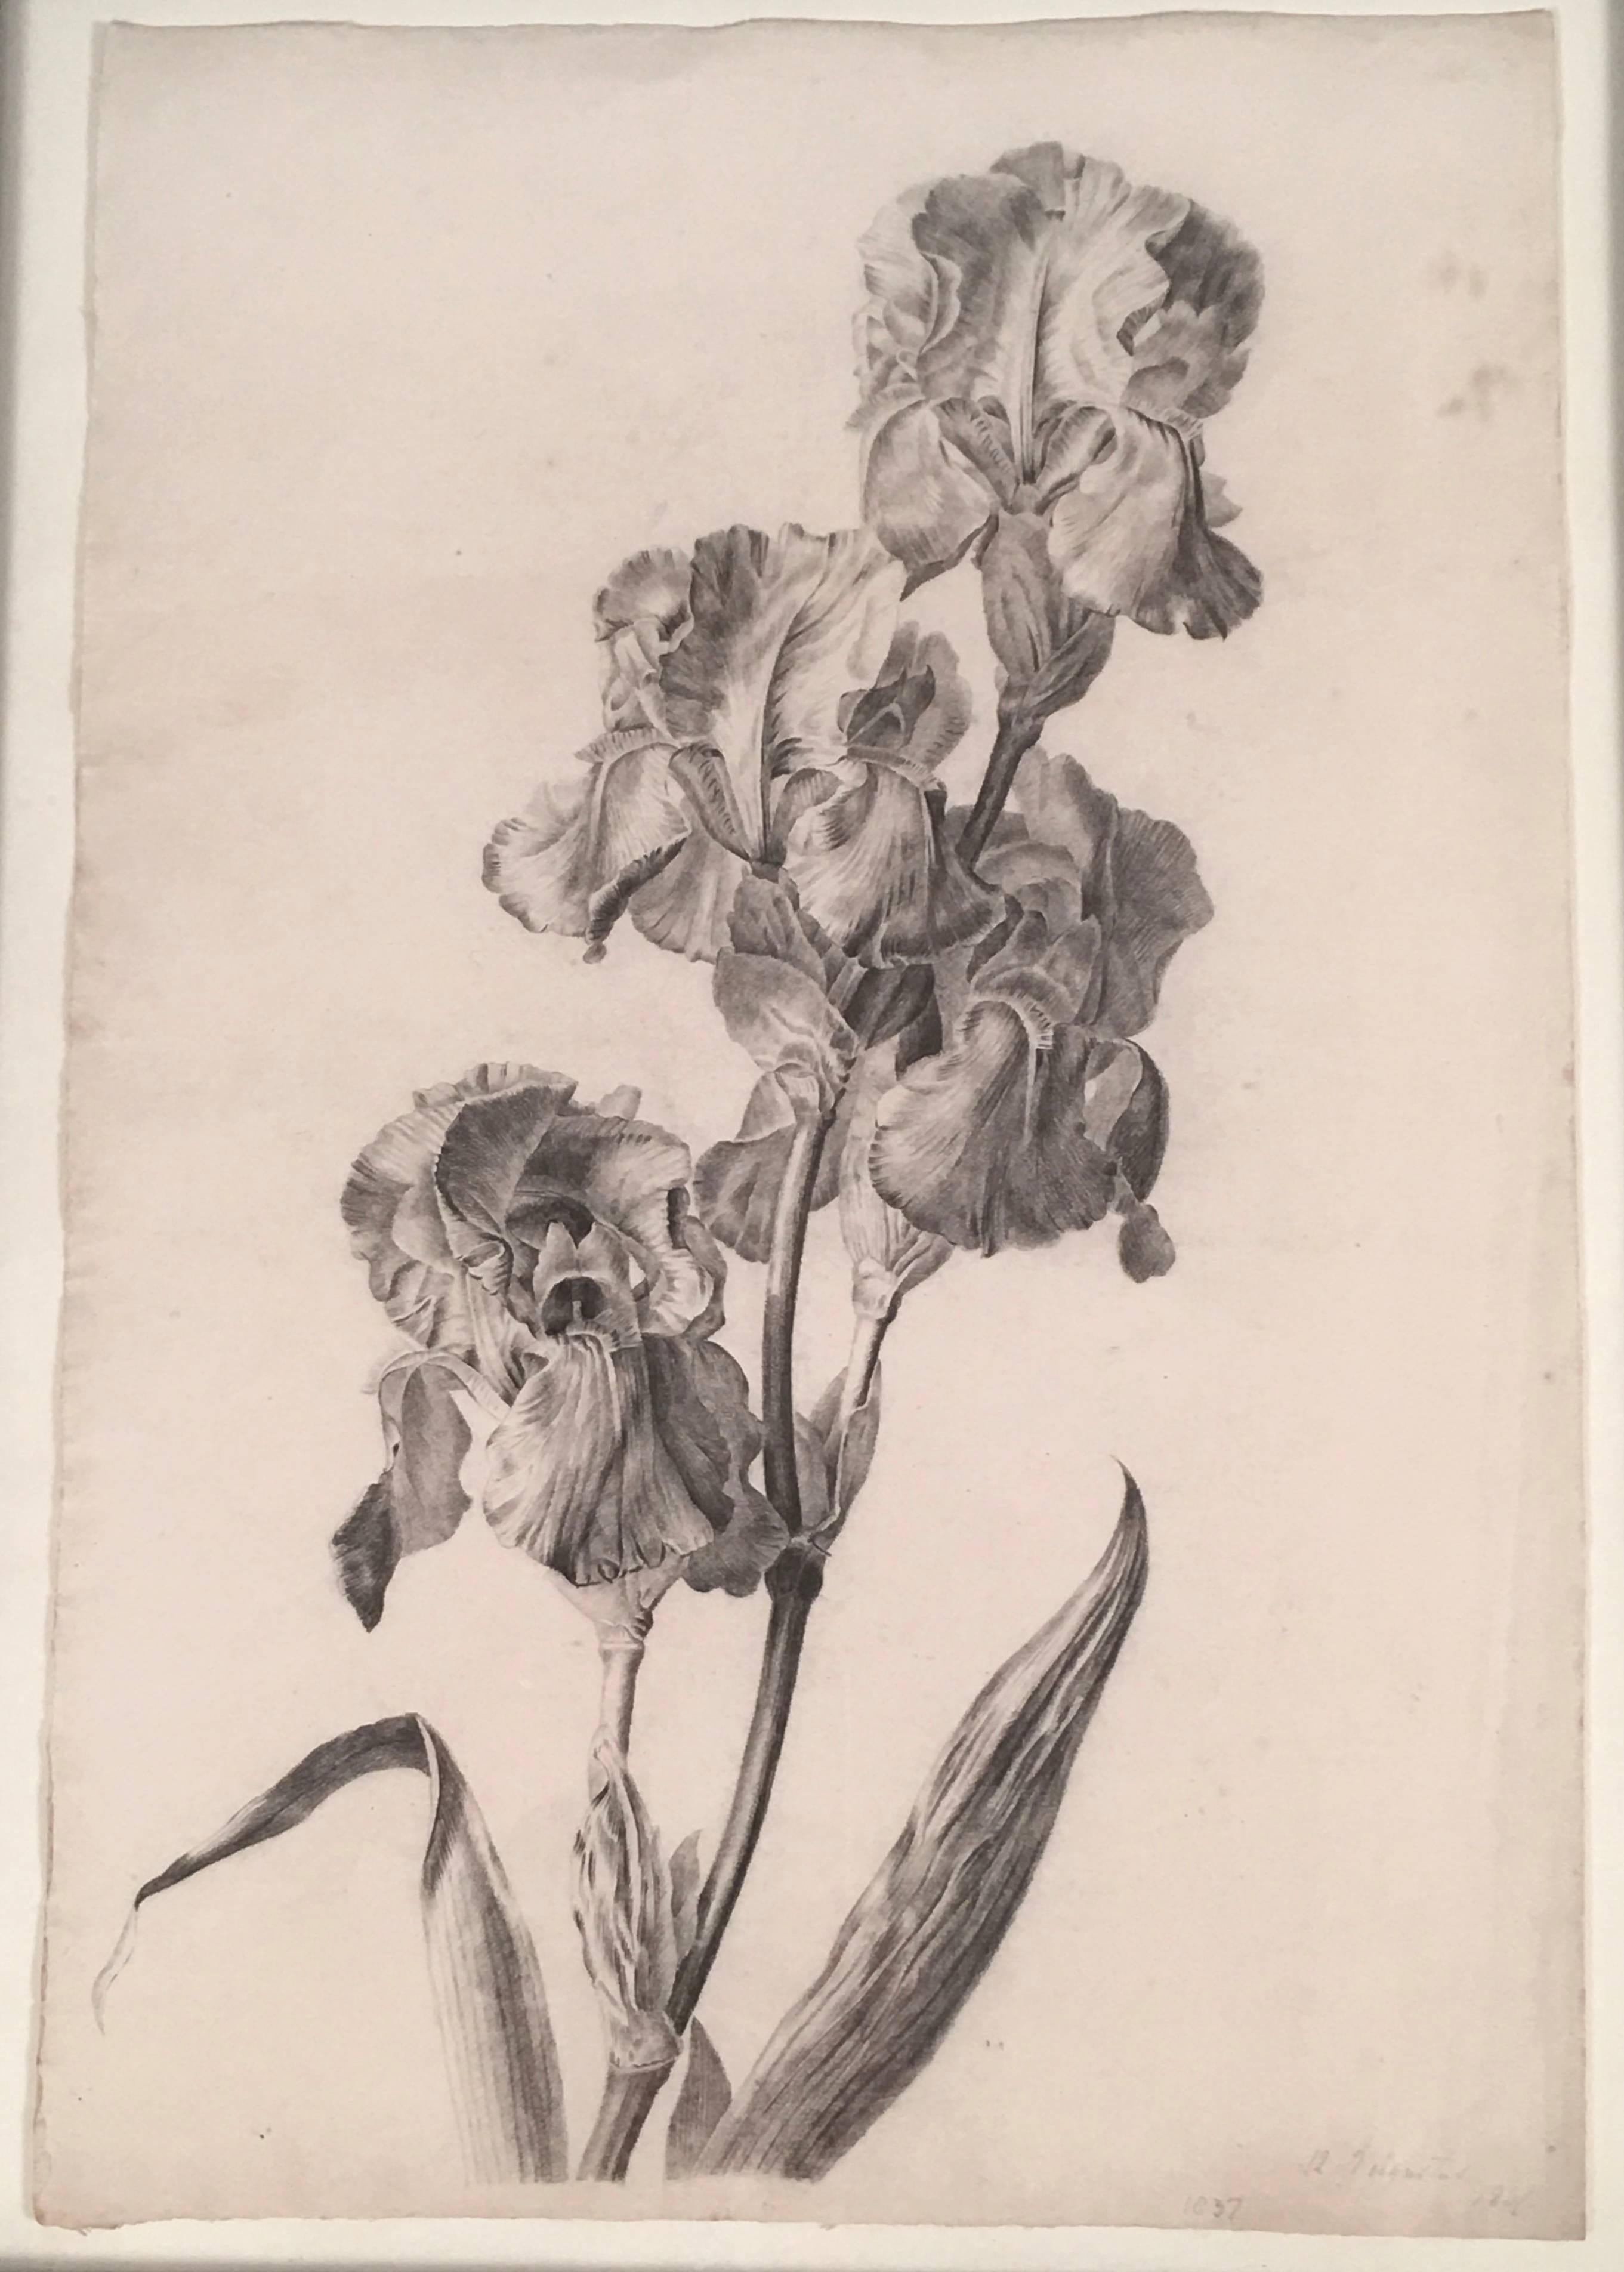 An exquisitely rendered Dutch charcoal drawing, circa 1837, on paper of irises, beautifully observed, dated lower right 